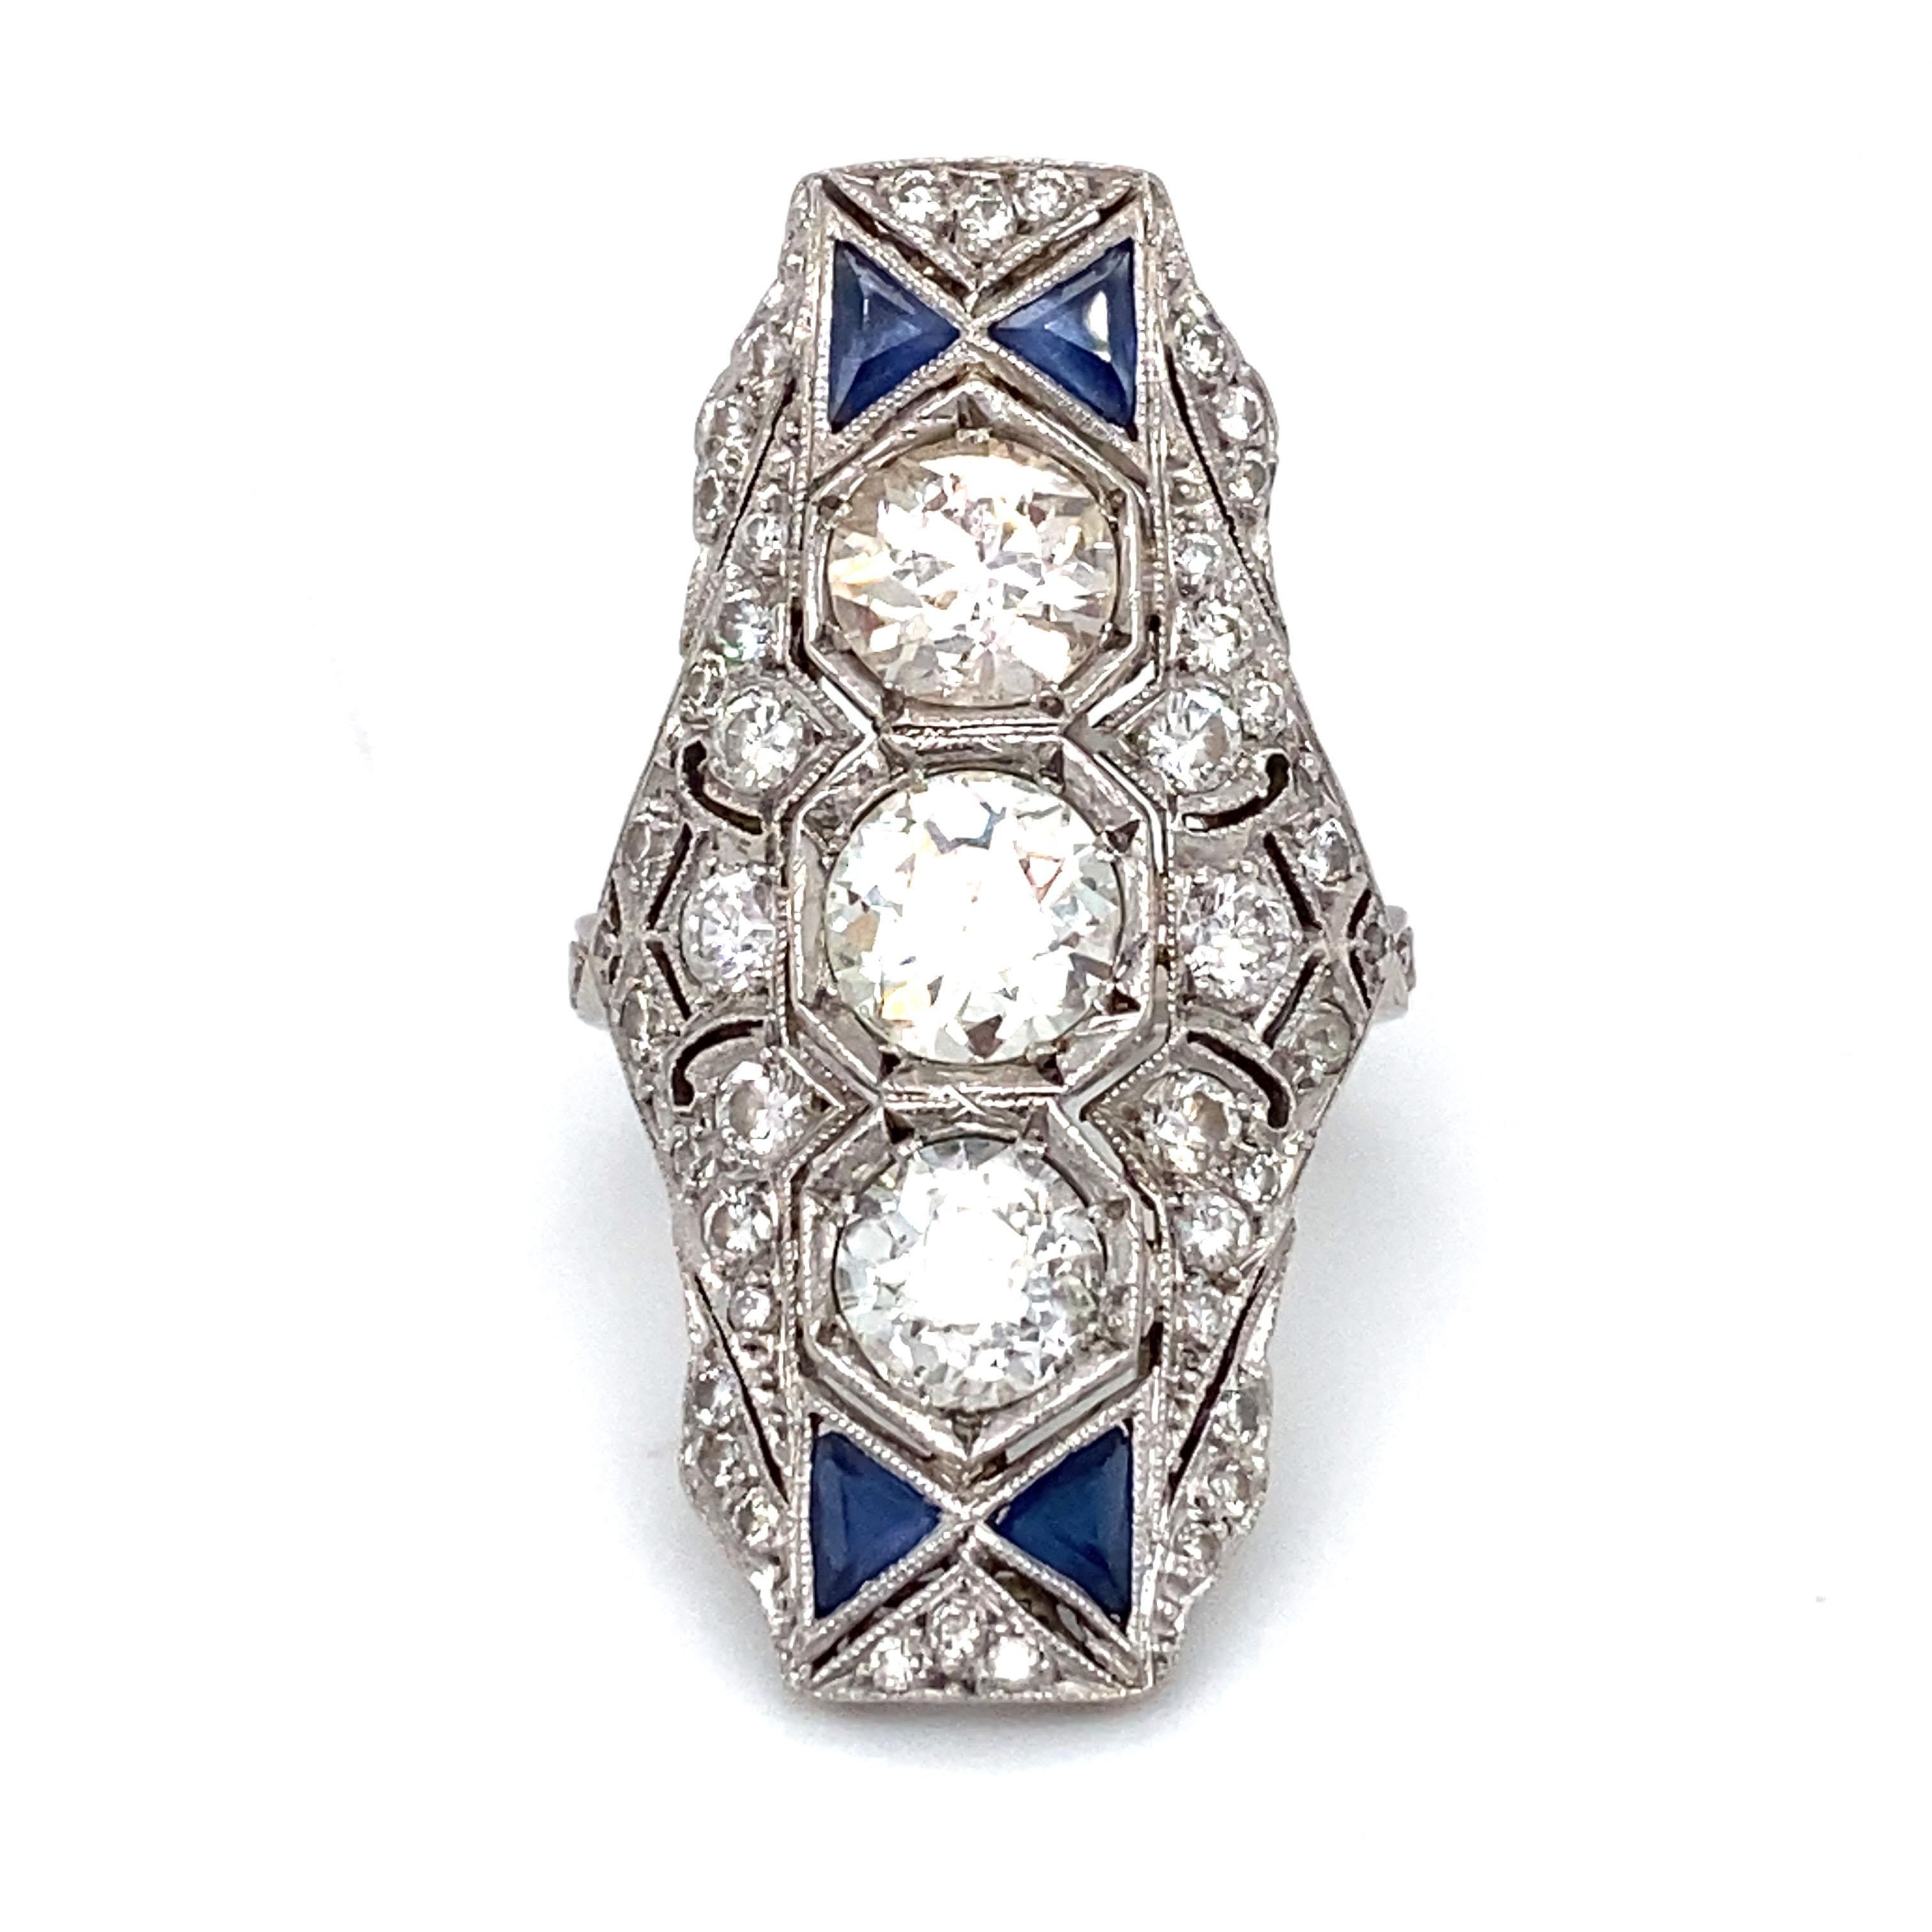 Item Details: 
This is an incredible Art Deco ring that features three large Old European cut diamonds accented by many smaller diamonds and sapphires. It is an excellent example of the captivating Art Deco jewelry era. One can only imagine who